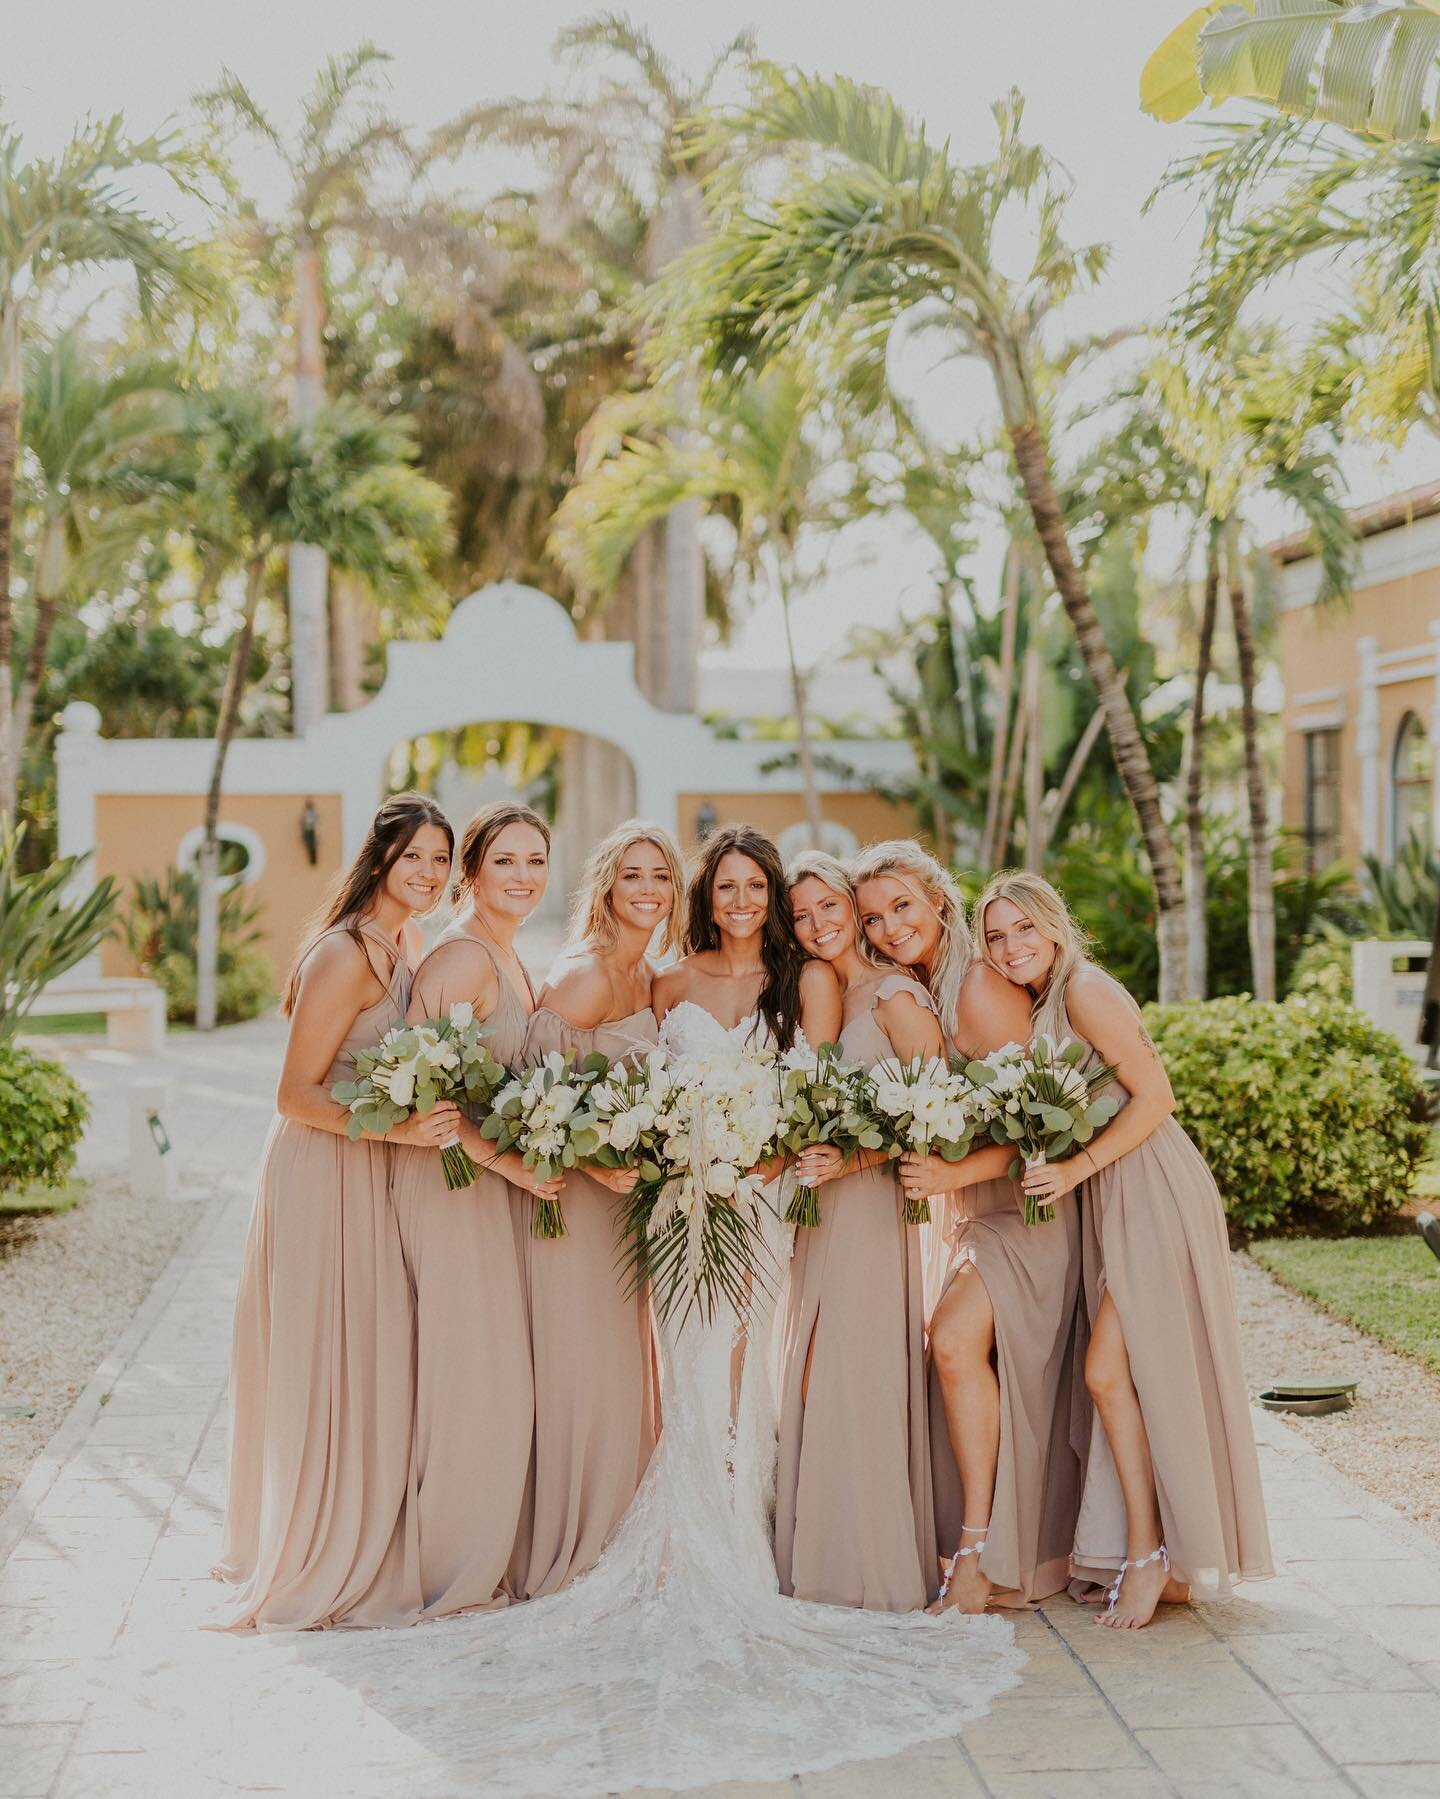 The bride and bridesmaids looked great for the Tulum wedding!!

Venue: @dreamsresorts 
Videographer: @sealoveweddingfilms